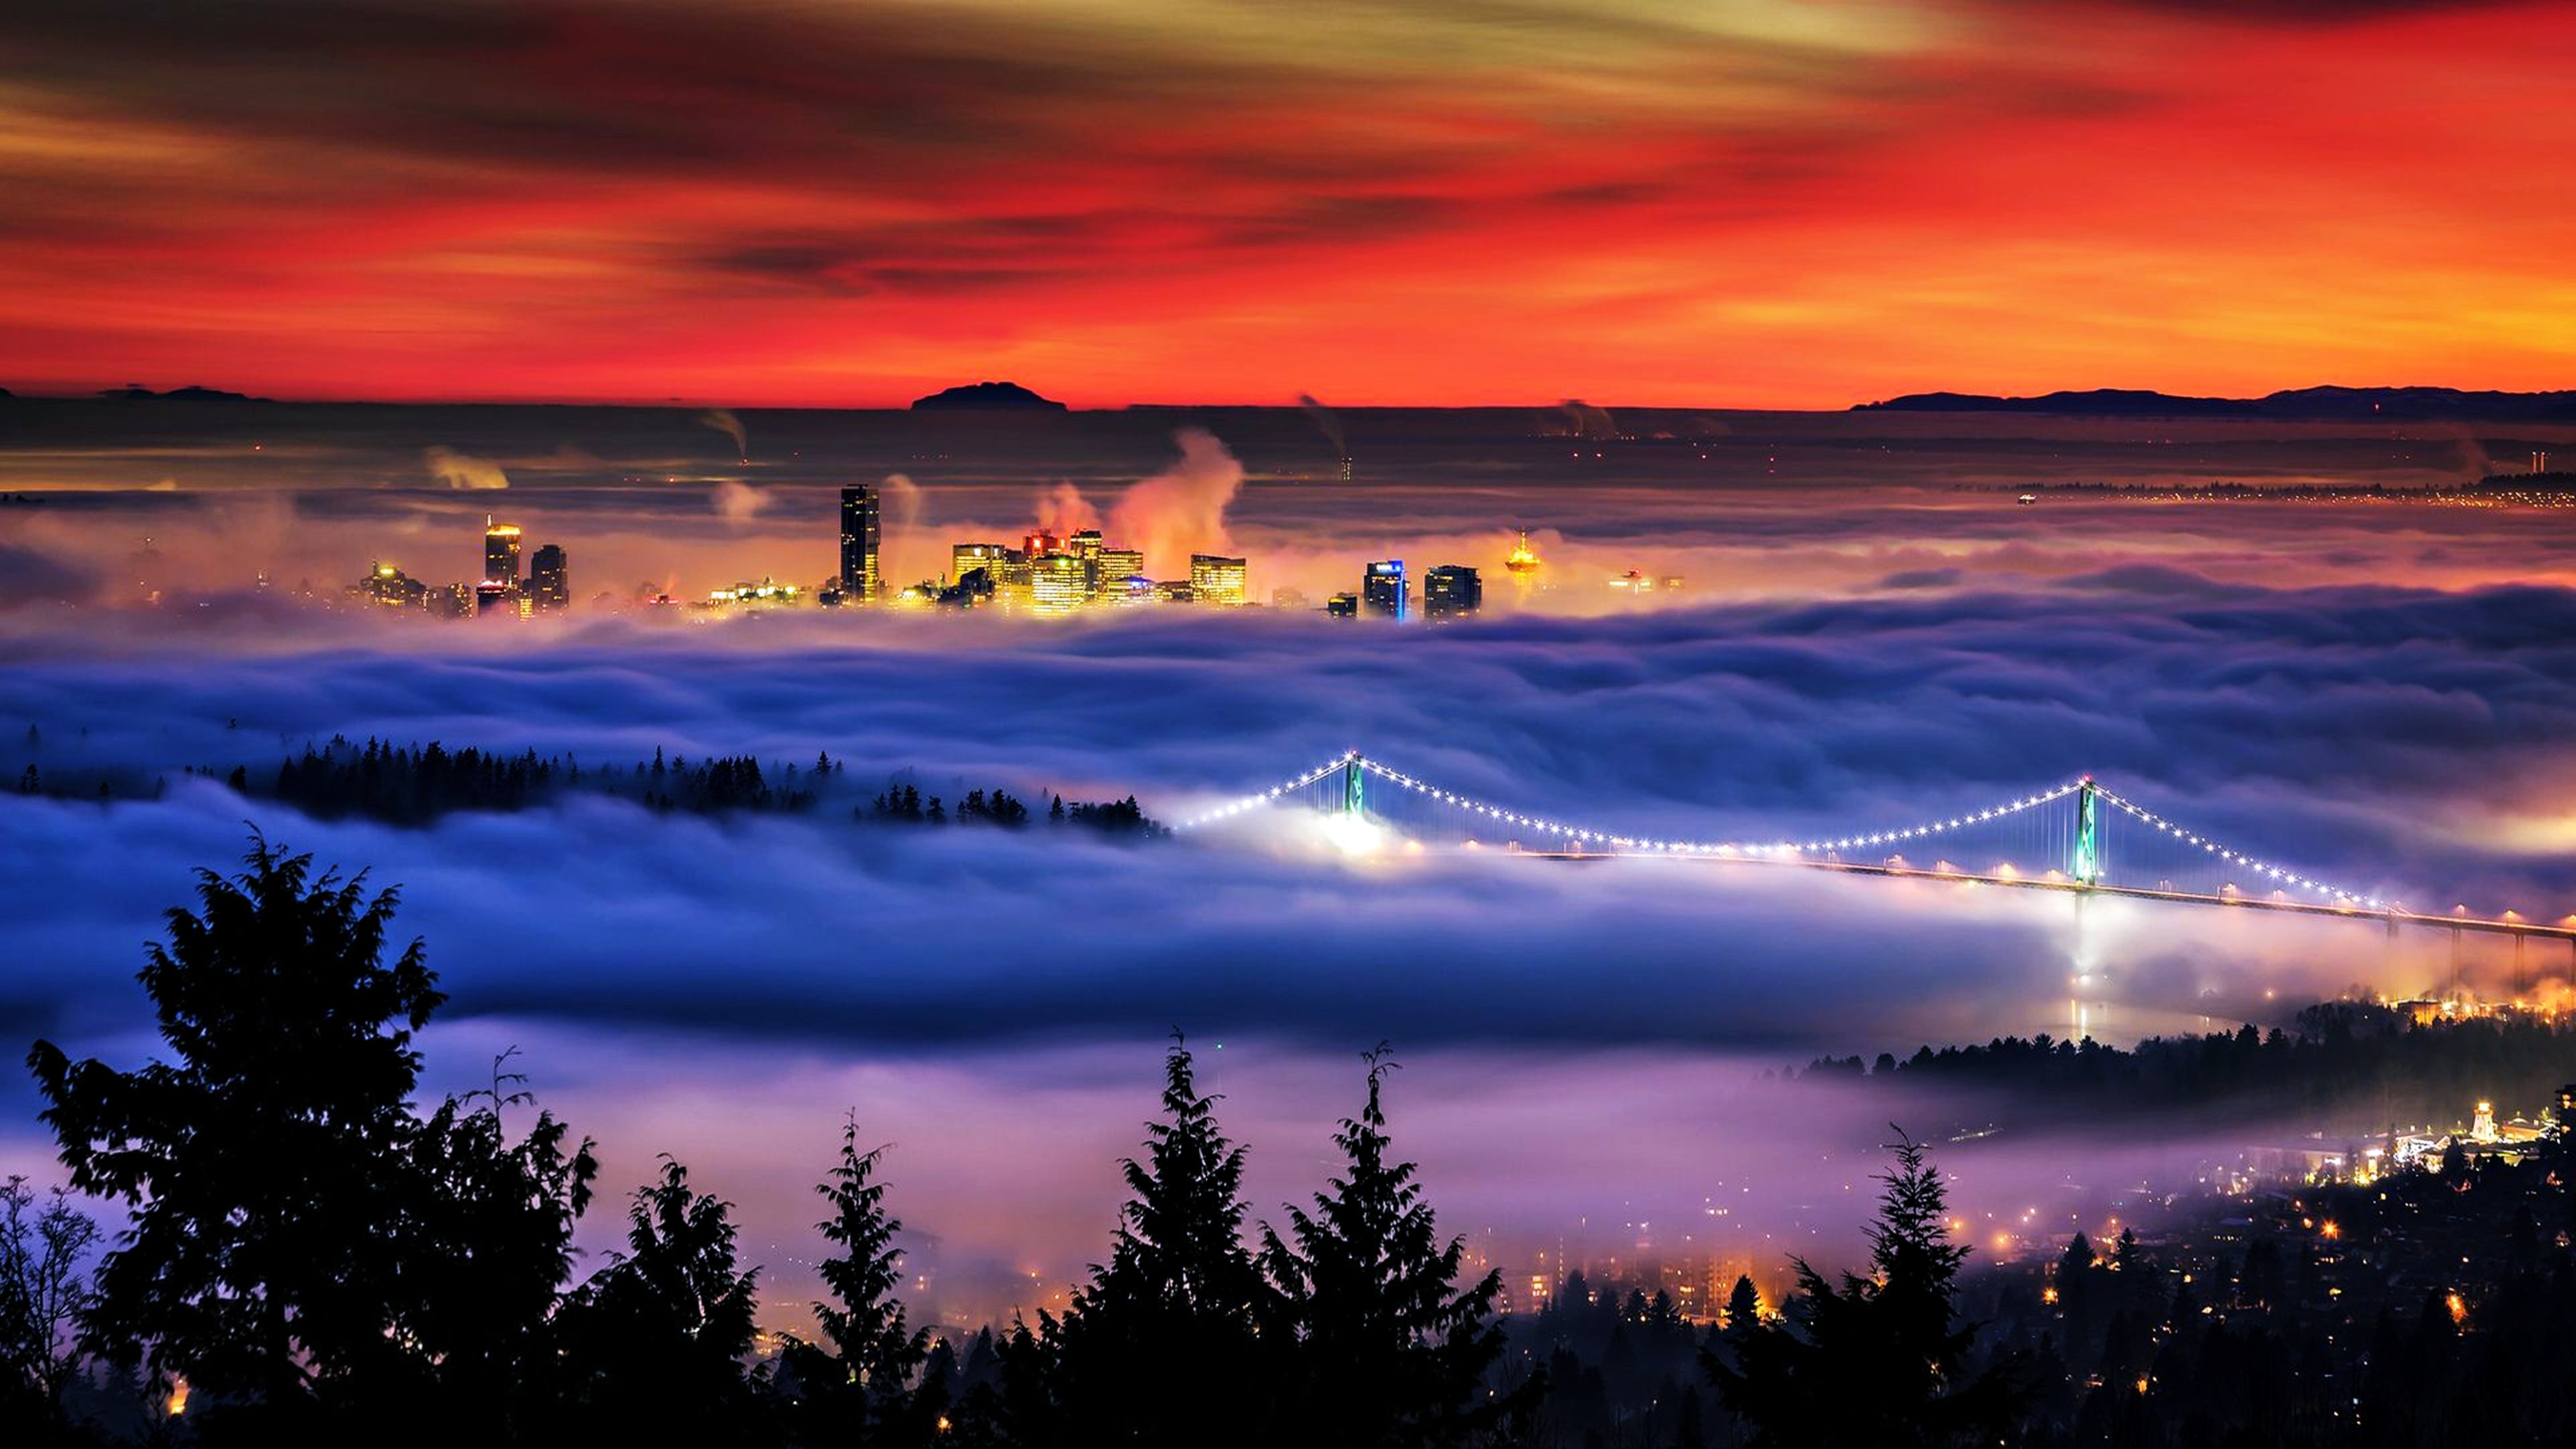 vancouver, Bridge, Fog, Sunset, Red, Landscapes, Nature, Buildings, Skyscrapers, Trees, Lights, City, Evening, Clouds, Sky Wallpaper